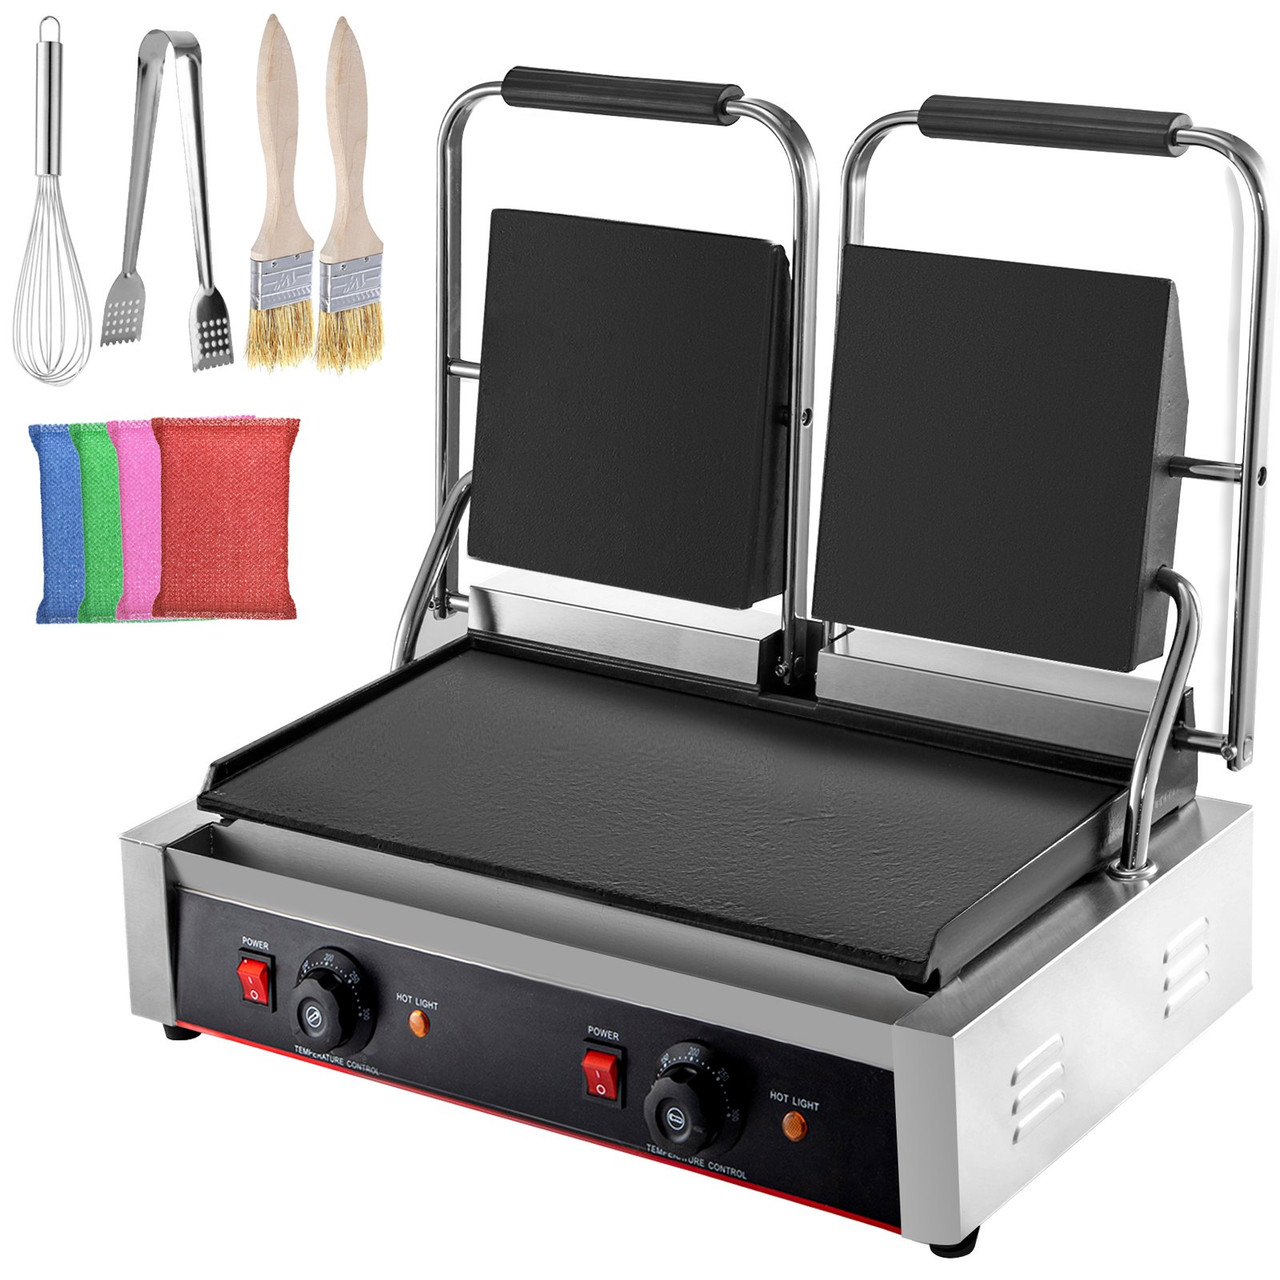 Commercial Sandwich Panini Press Grill, 2X1800W Double Flat Plates Electric  Stainless Steel Sandwich Maker, Temperature Control